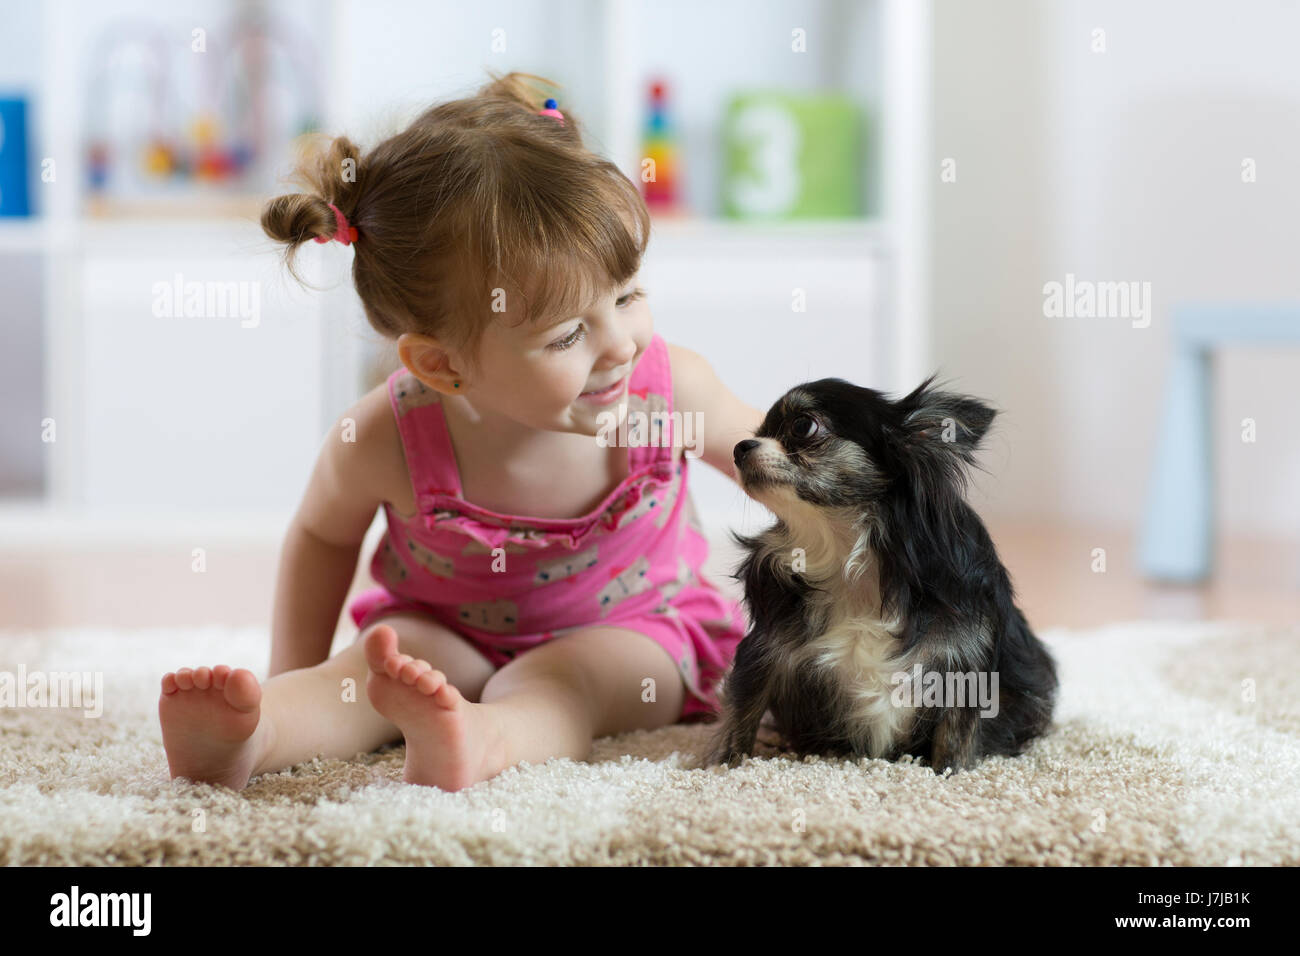 Child girl with little dog black hairy chihuahua doggy Stock Photo